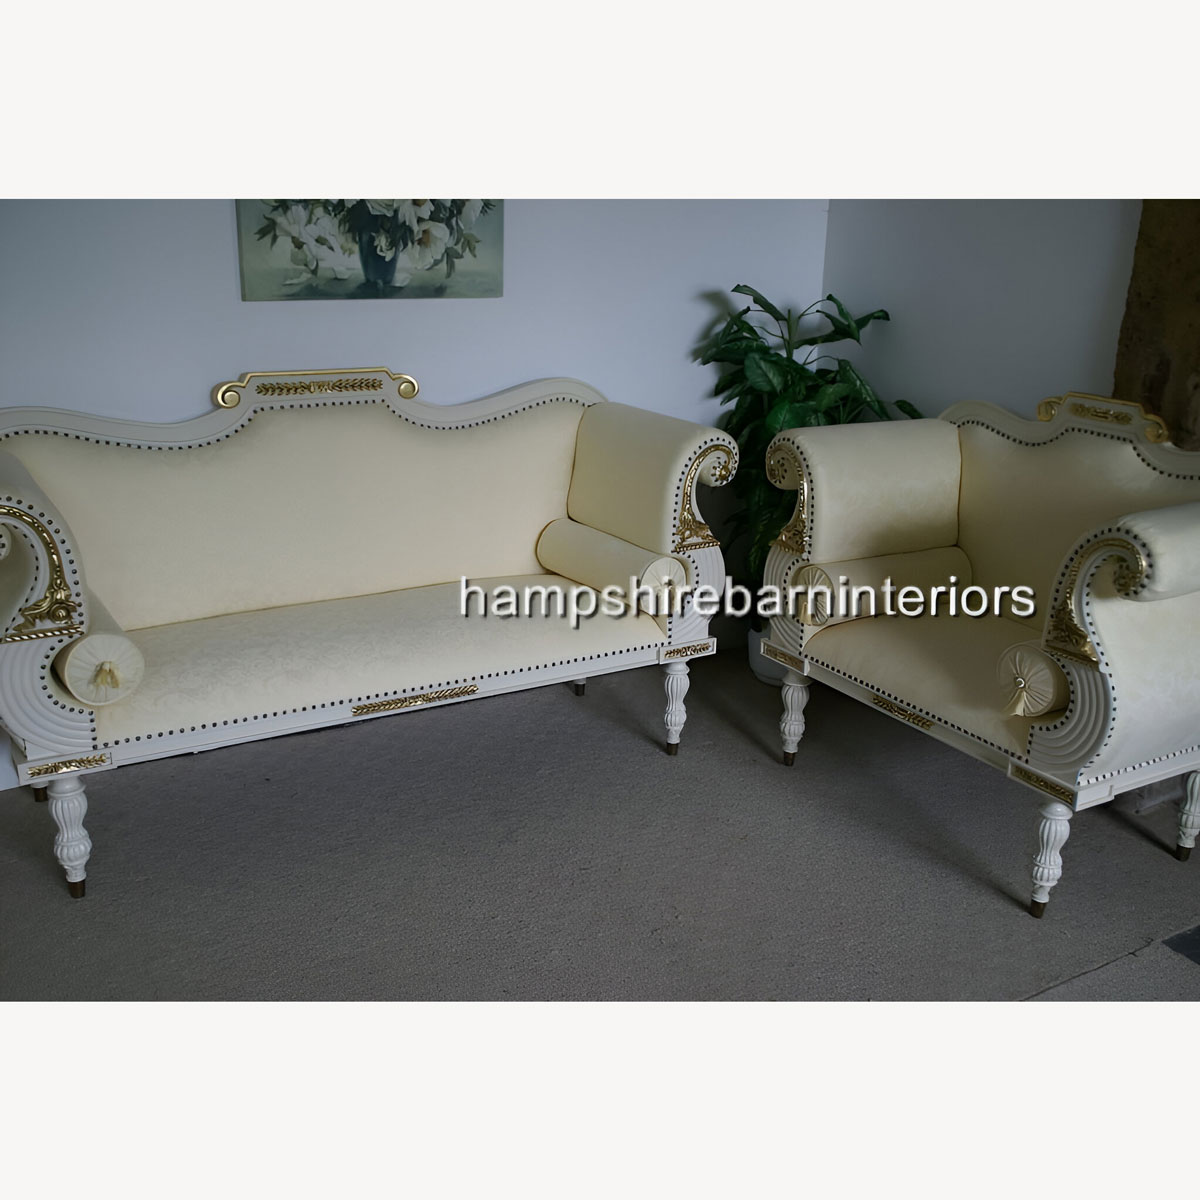 Regency Bergere Suite In Antique White With Cream Fabric 2 - Hampshire Barn Interiors - Regency Bergere Suite In Antique White With Cream Fabric -